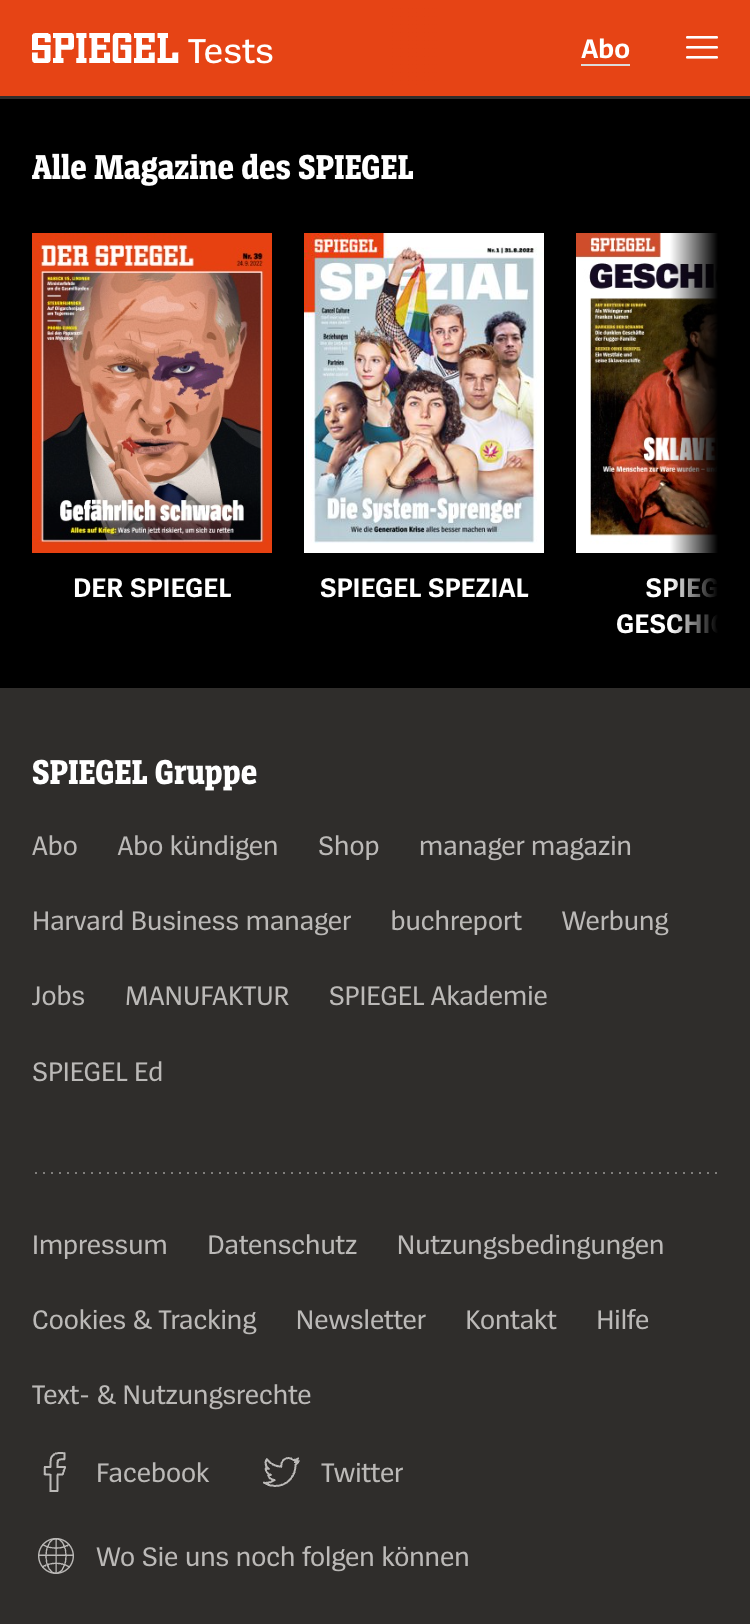 Mobile screenshot of the Der Spiegel website footer. The header contains the Spiegel logo and a menu button. Below that there is a row of magazine cover images that extend off screen. In the lower half of the screen there is a list of page links followed by social media links.